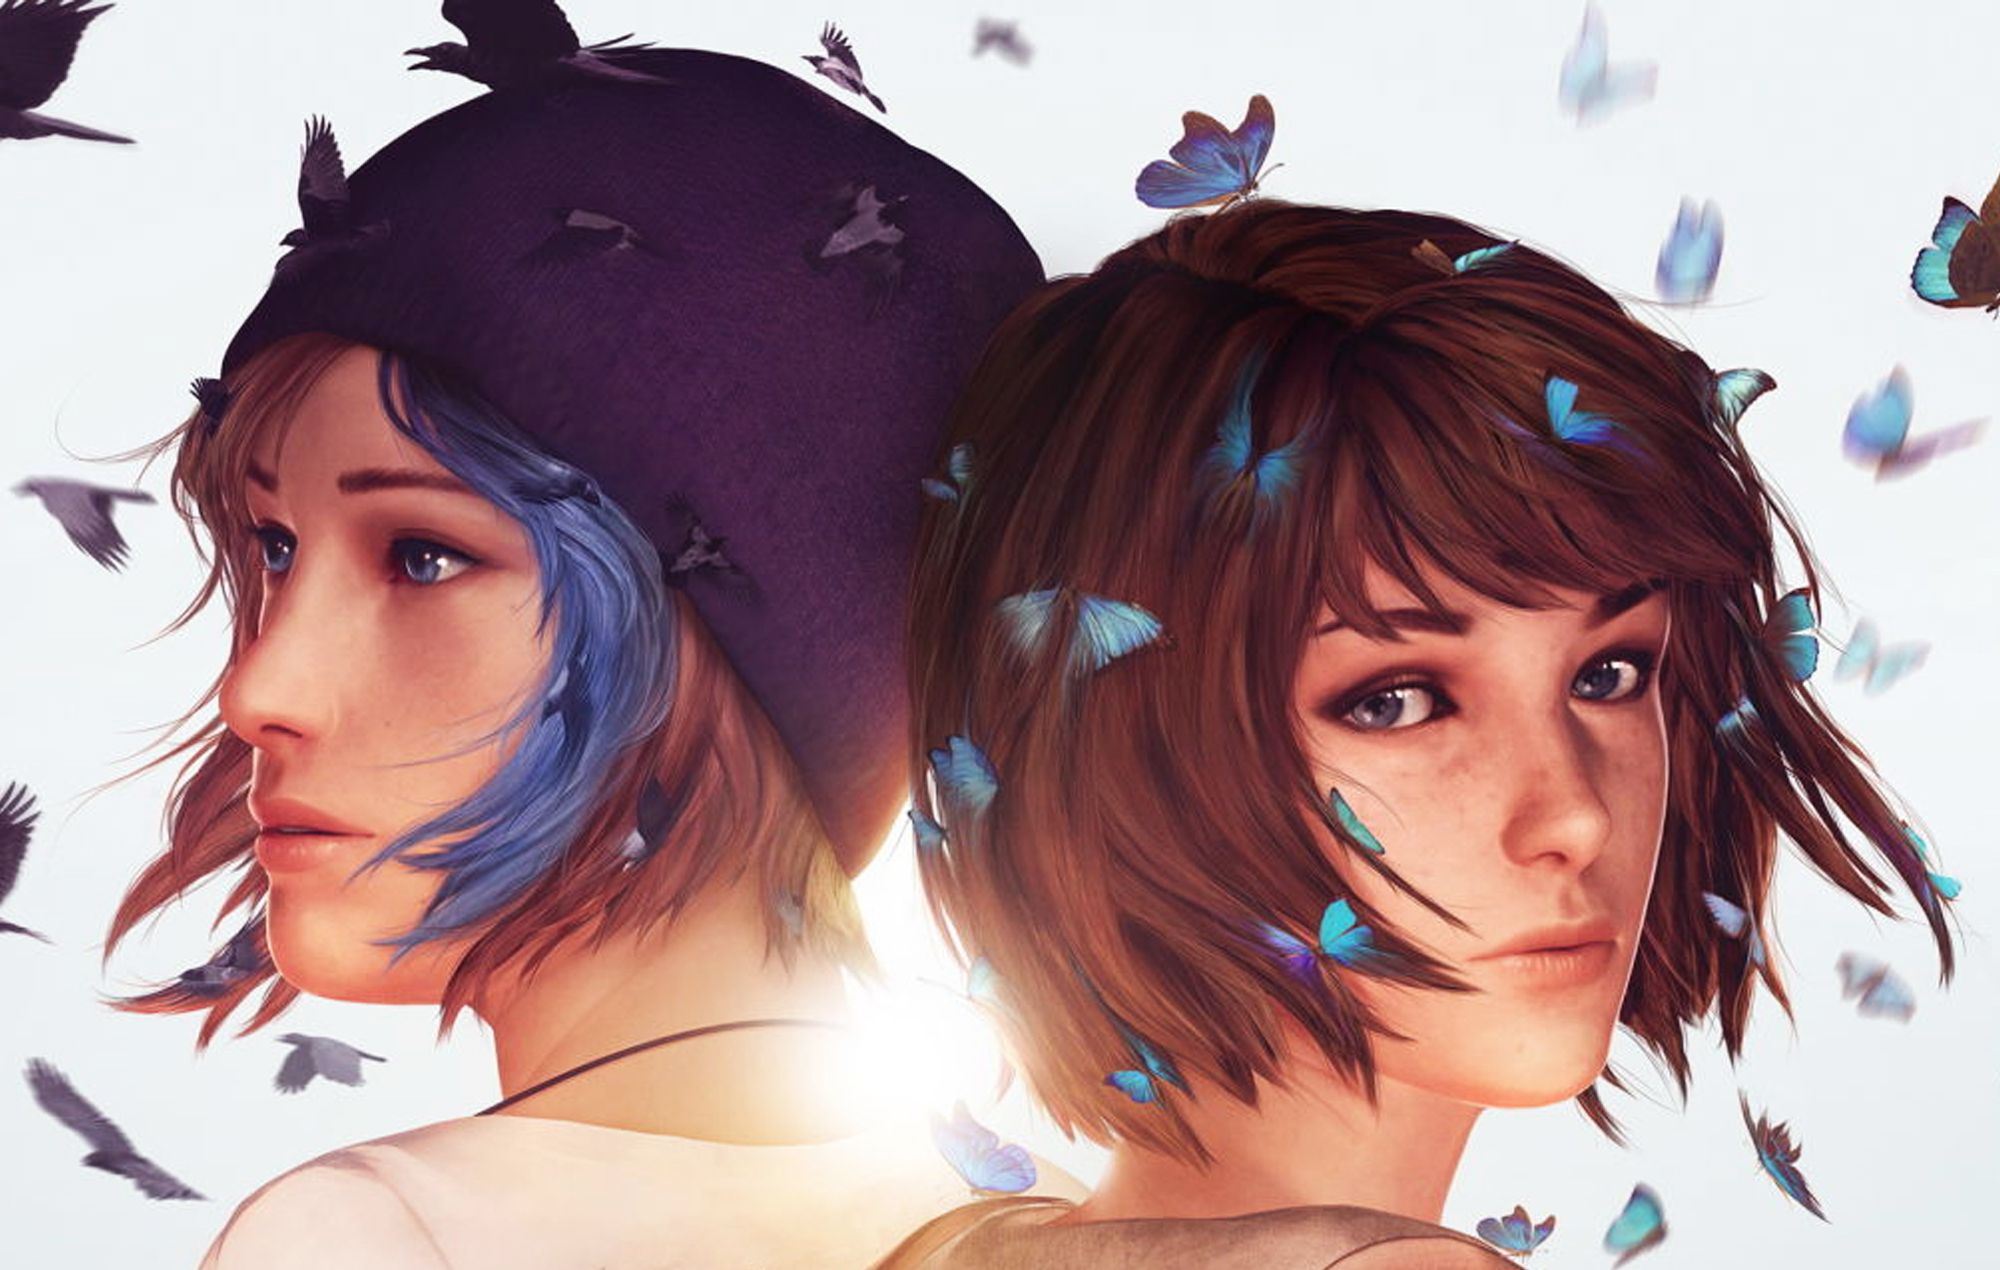 Life Is Strange' Remastered Collection has been announced